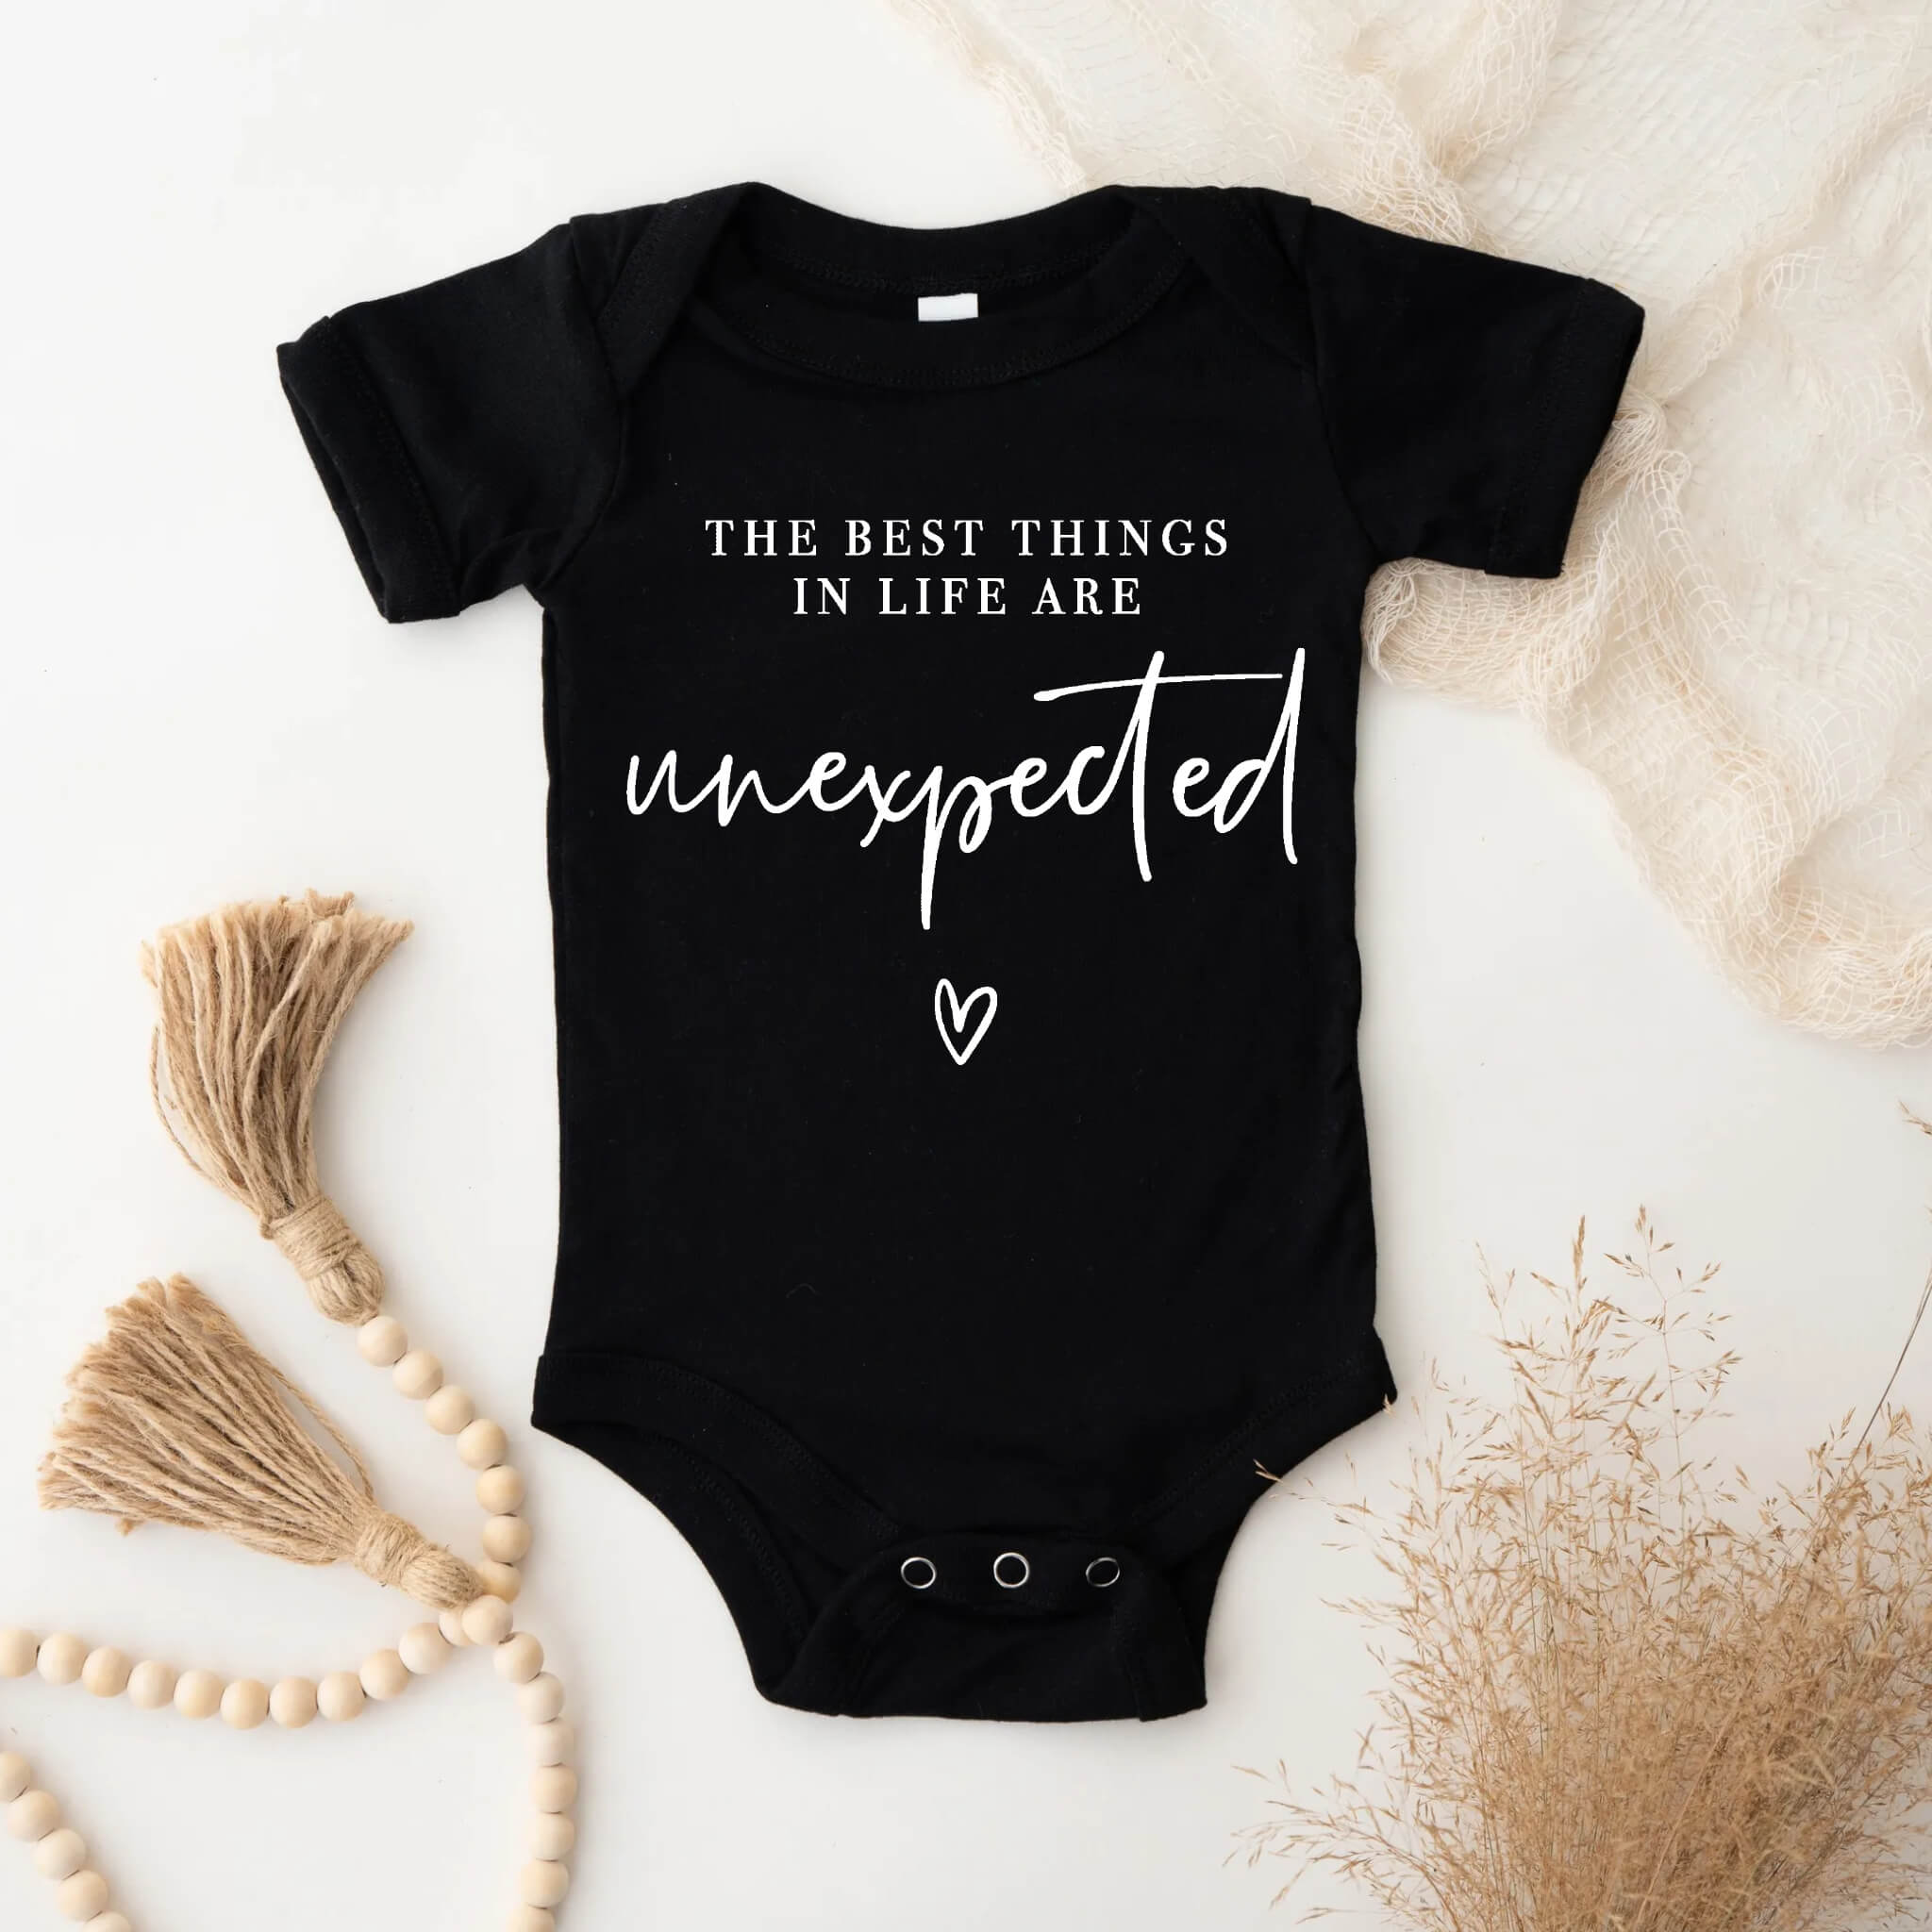 Personalized Pregnancy Announcement, The Best Things In Life Are Unexpected, Dad, Grandma, Grandpa, Auntie, Uncle To Be, Customized Baby Announcement Onesie, Personalized Due Date Gift Box